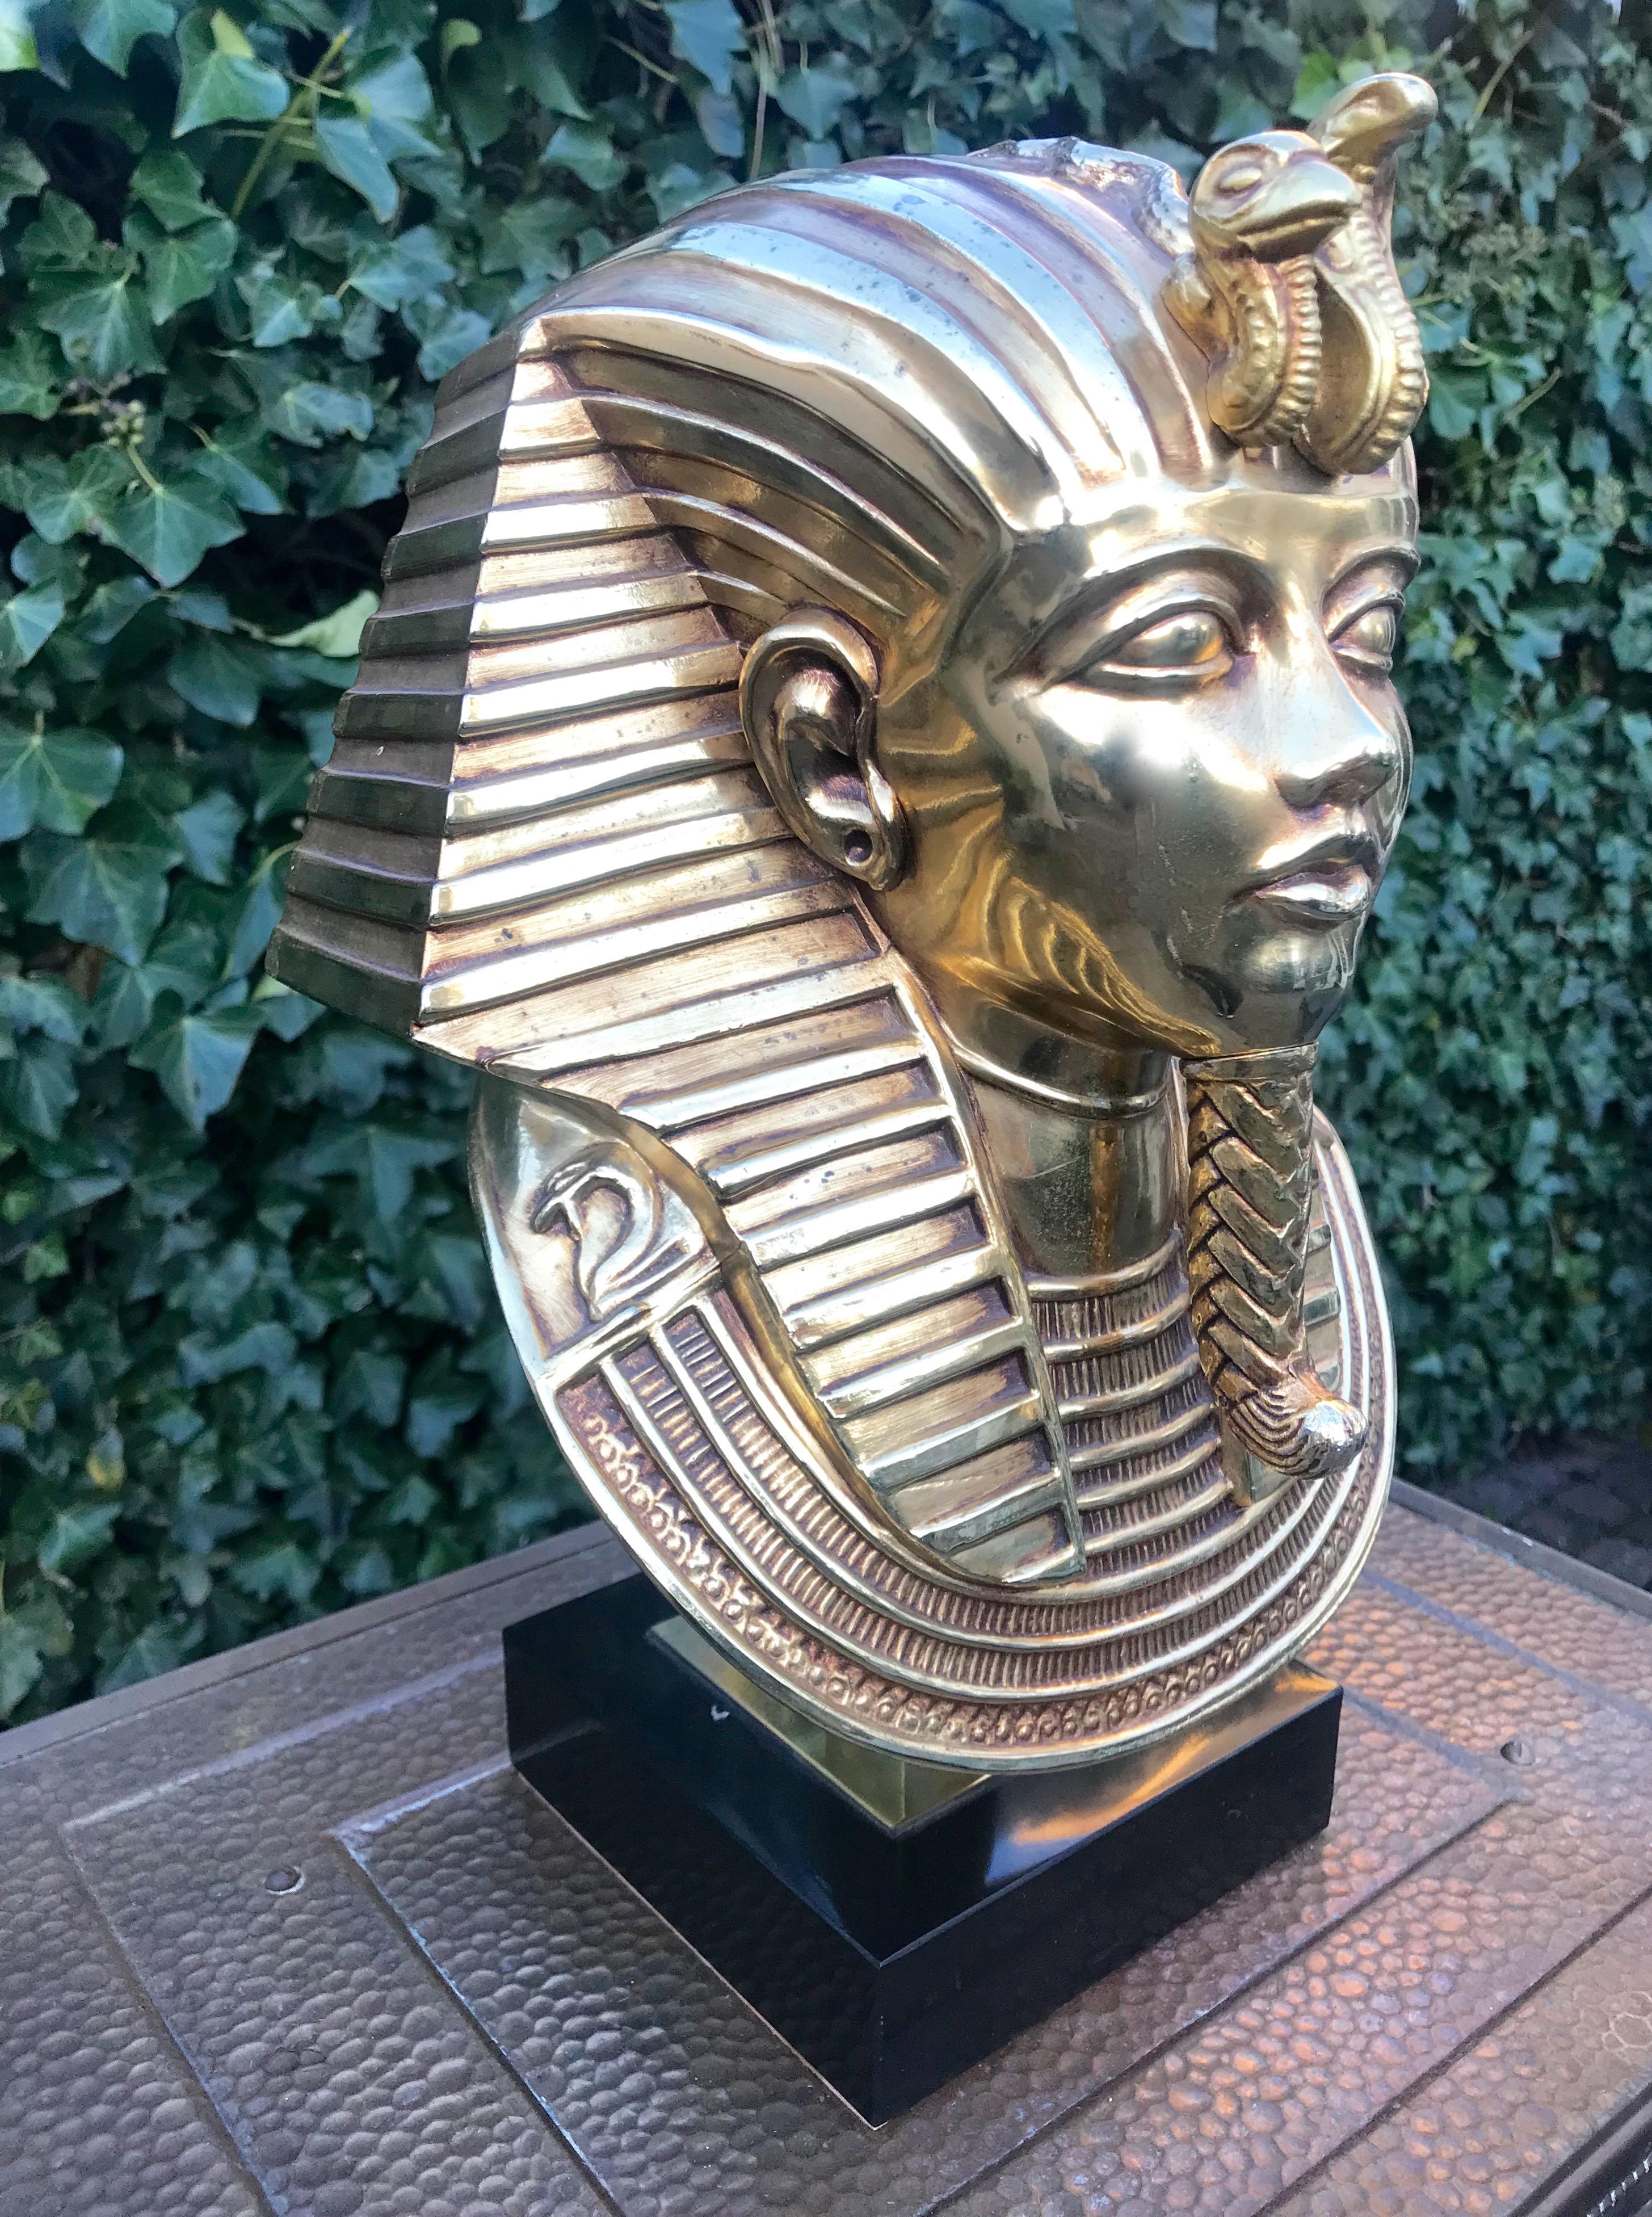 Top quality and condition sculpture. 

If you are a collector of anything to do with ancient Egypt or if you are decorating a room or business with an Egyptian theme then this rare Pharaoh sculpture could be perfect for that. It is much more golden